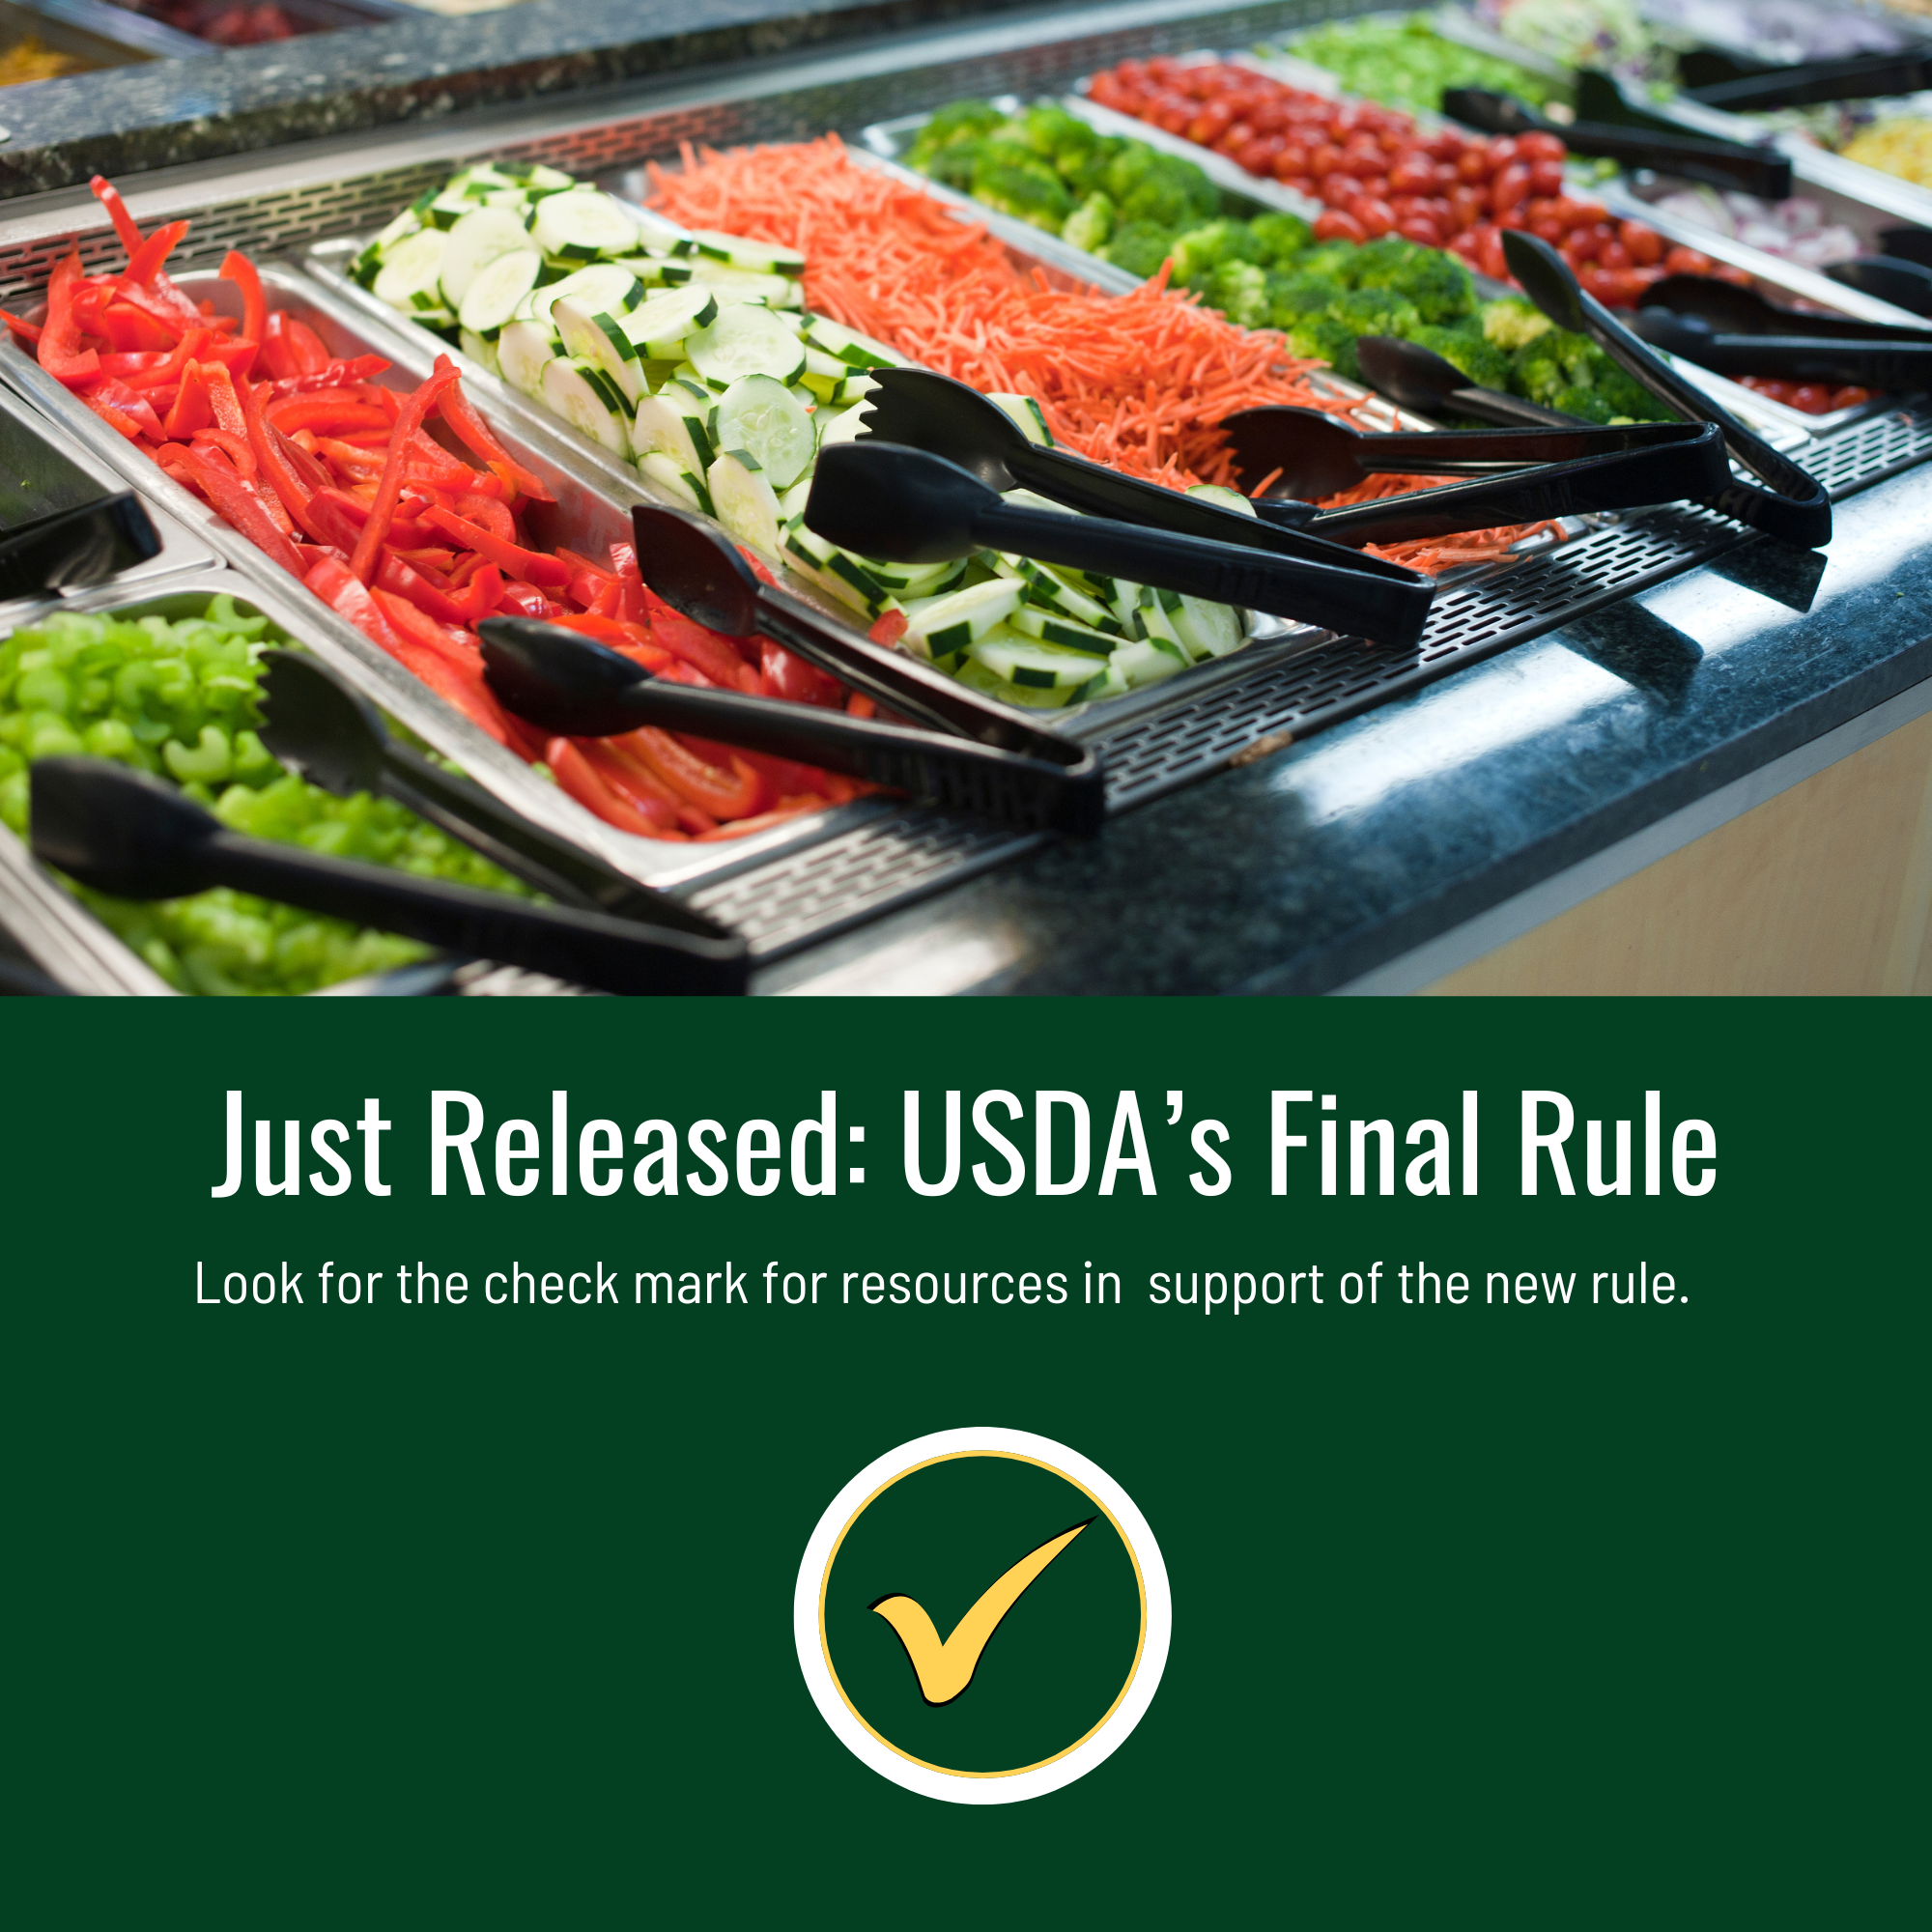 USDA promotional graphic for final ruling featuring a salad bar photo and resource check mark icon